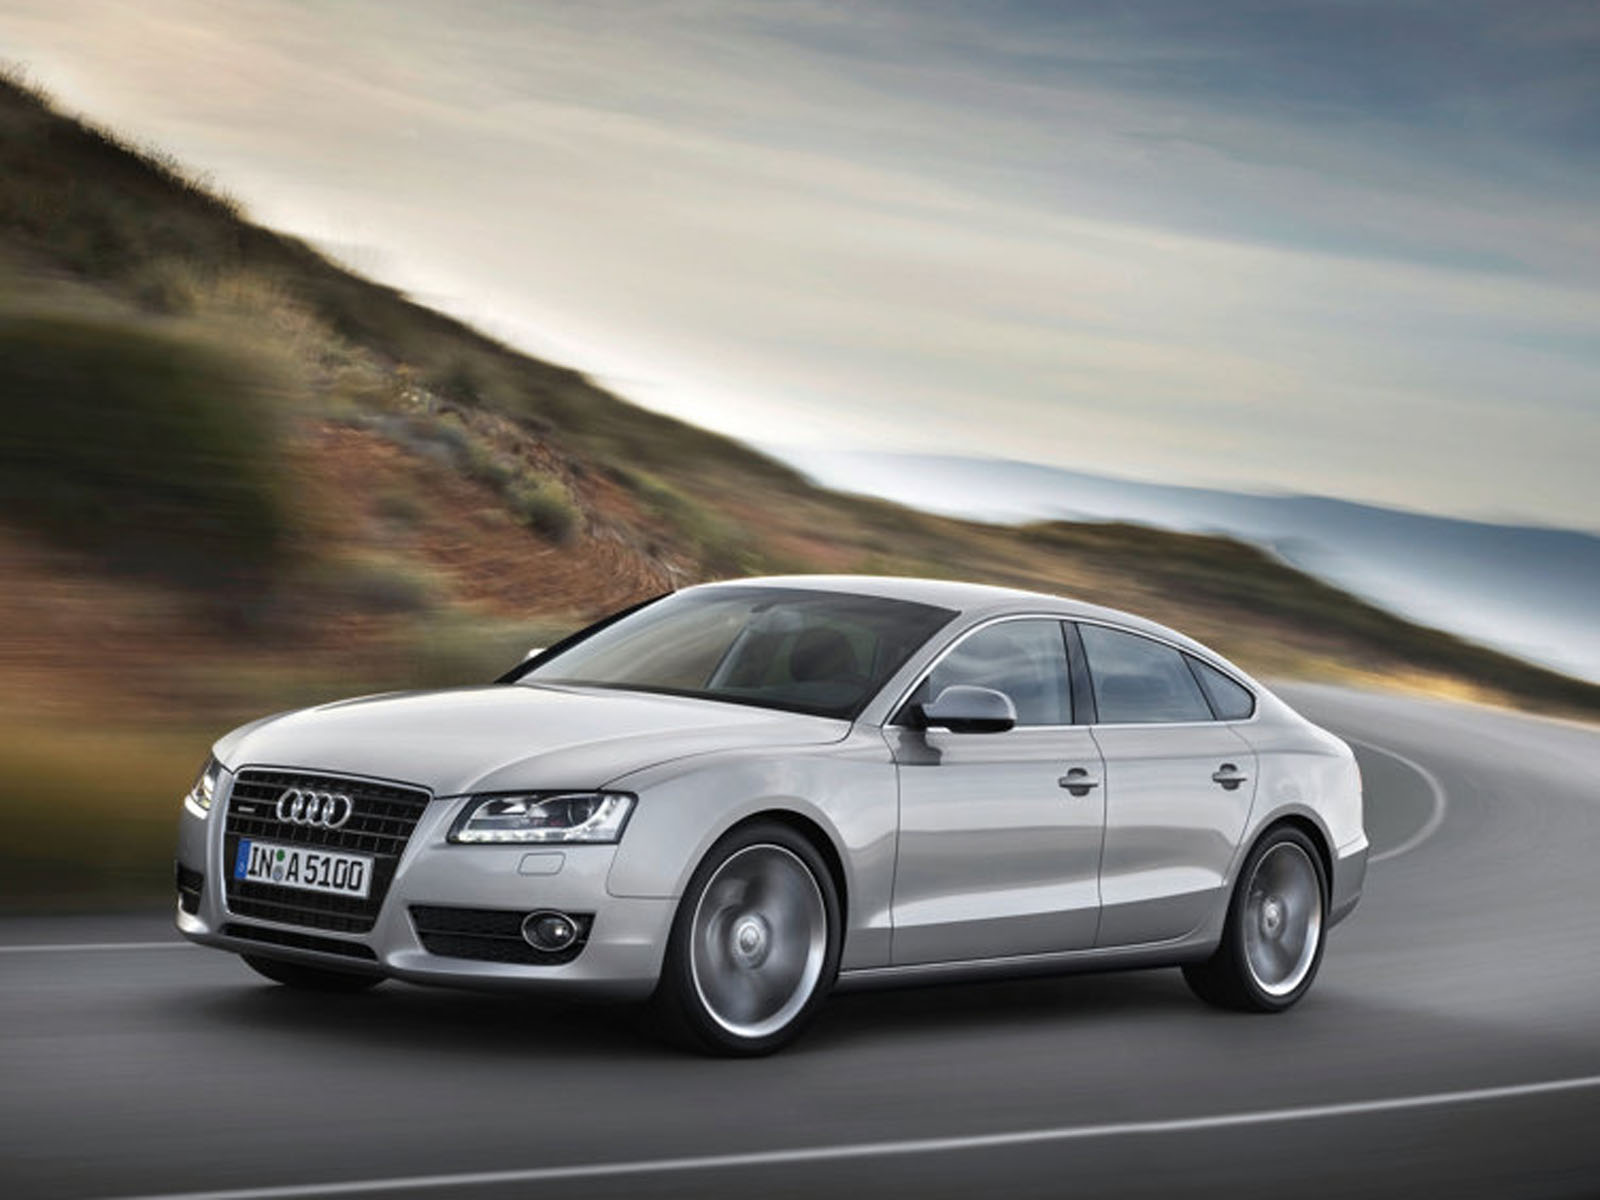 Tag Audi A5 Sportback Car Wallpaper Background Photos Image And